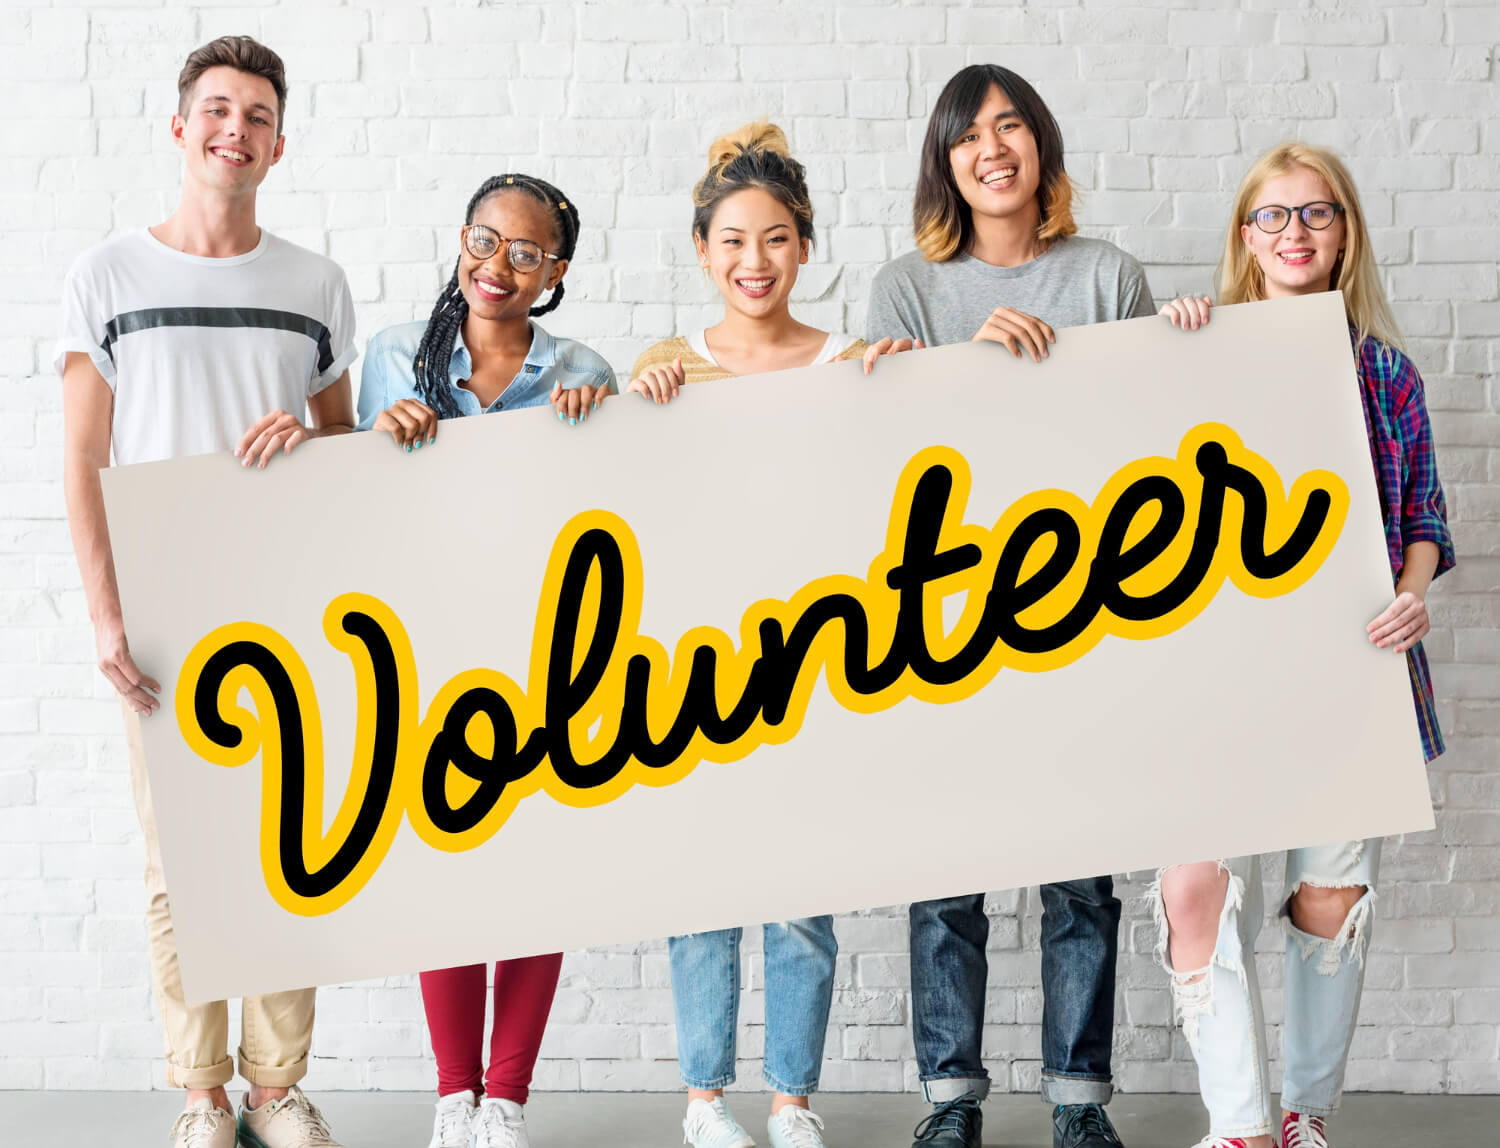 Volunteer Programs For College Students in New Orleans